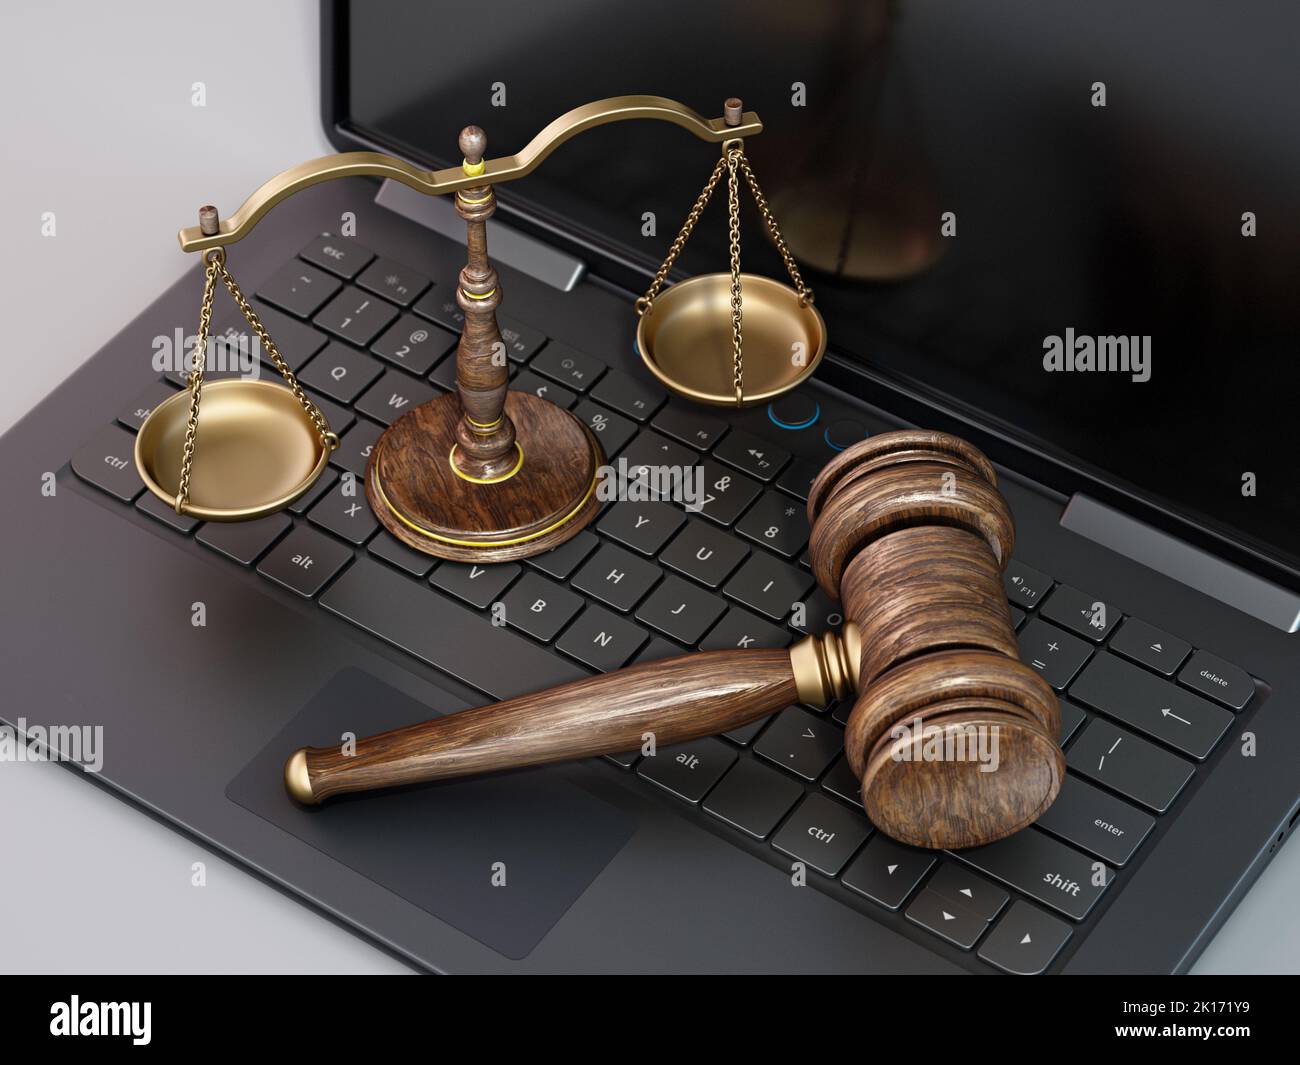 Judge gavel and balanced scale standing on laptop computer keyboard. 3D illustration. Stock Photo